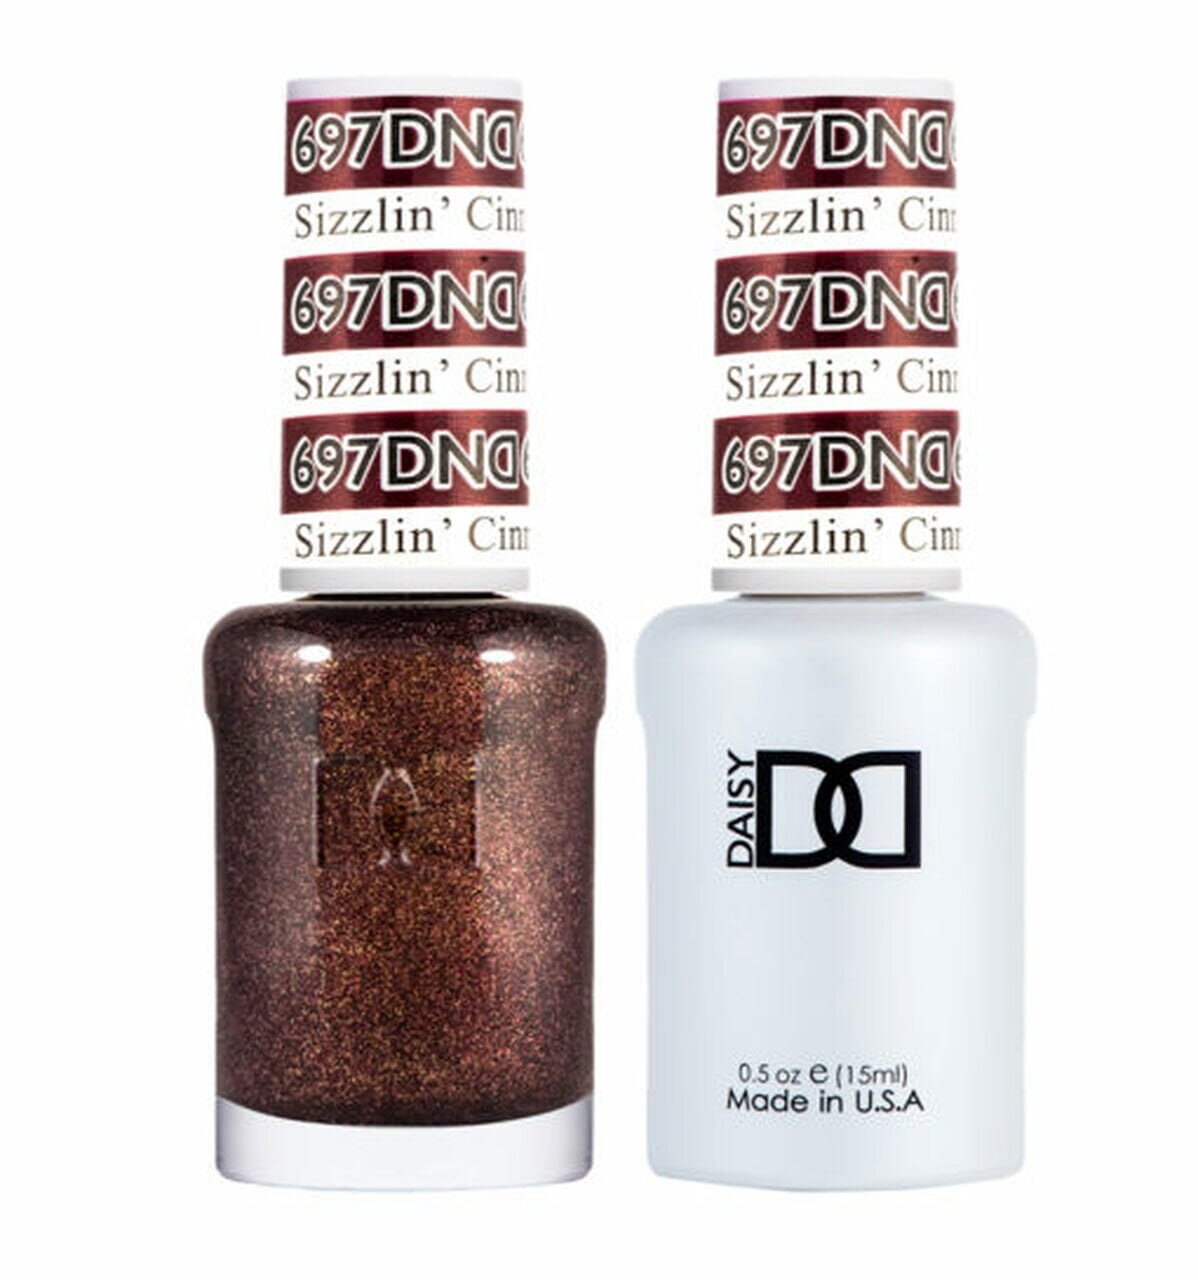 DND Duo Gel Matching Color - 697 Sizzlin' Cinnamon - Jessica Nail & Beauty Supply - Canada Nail Beauty Supply - DND DUO